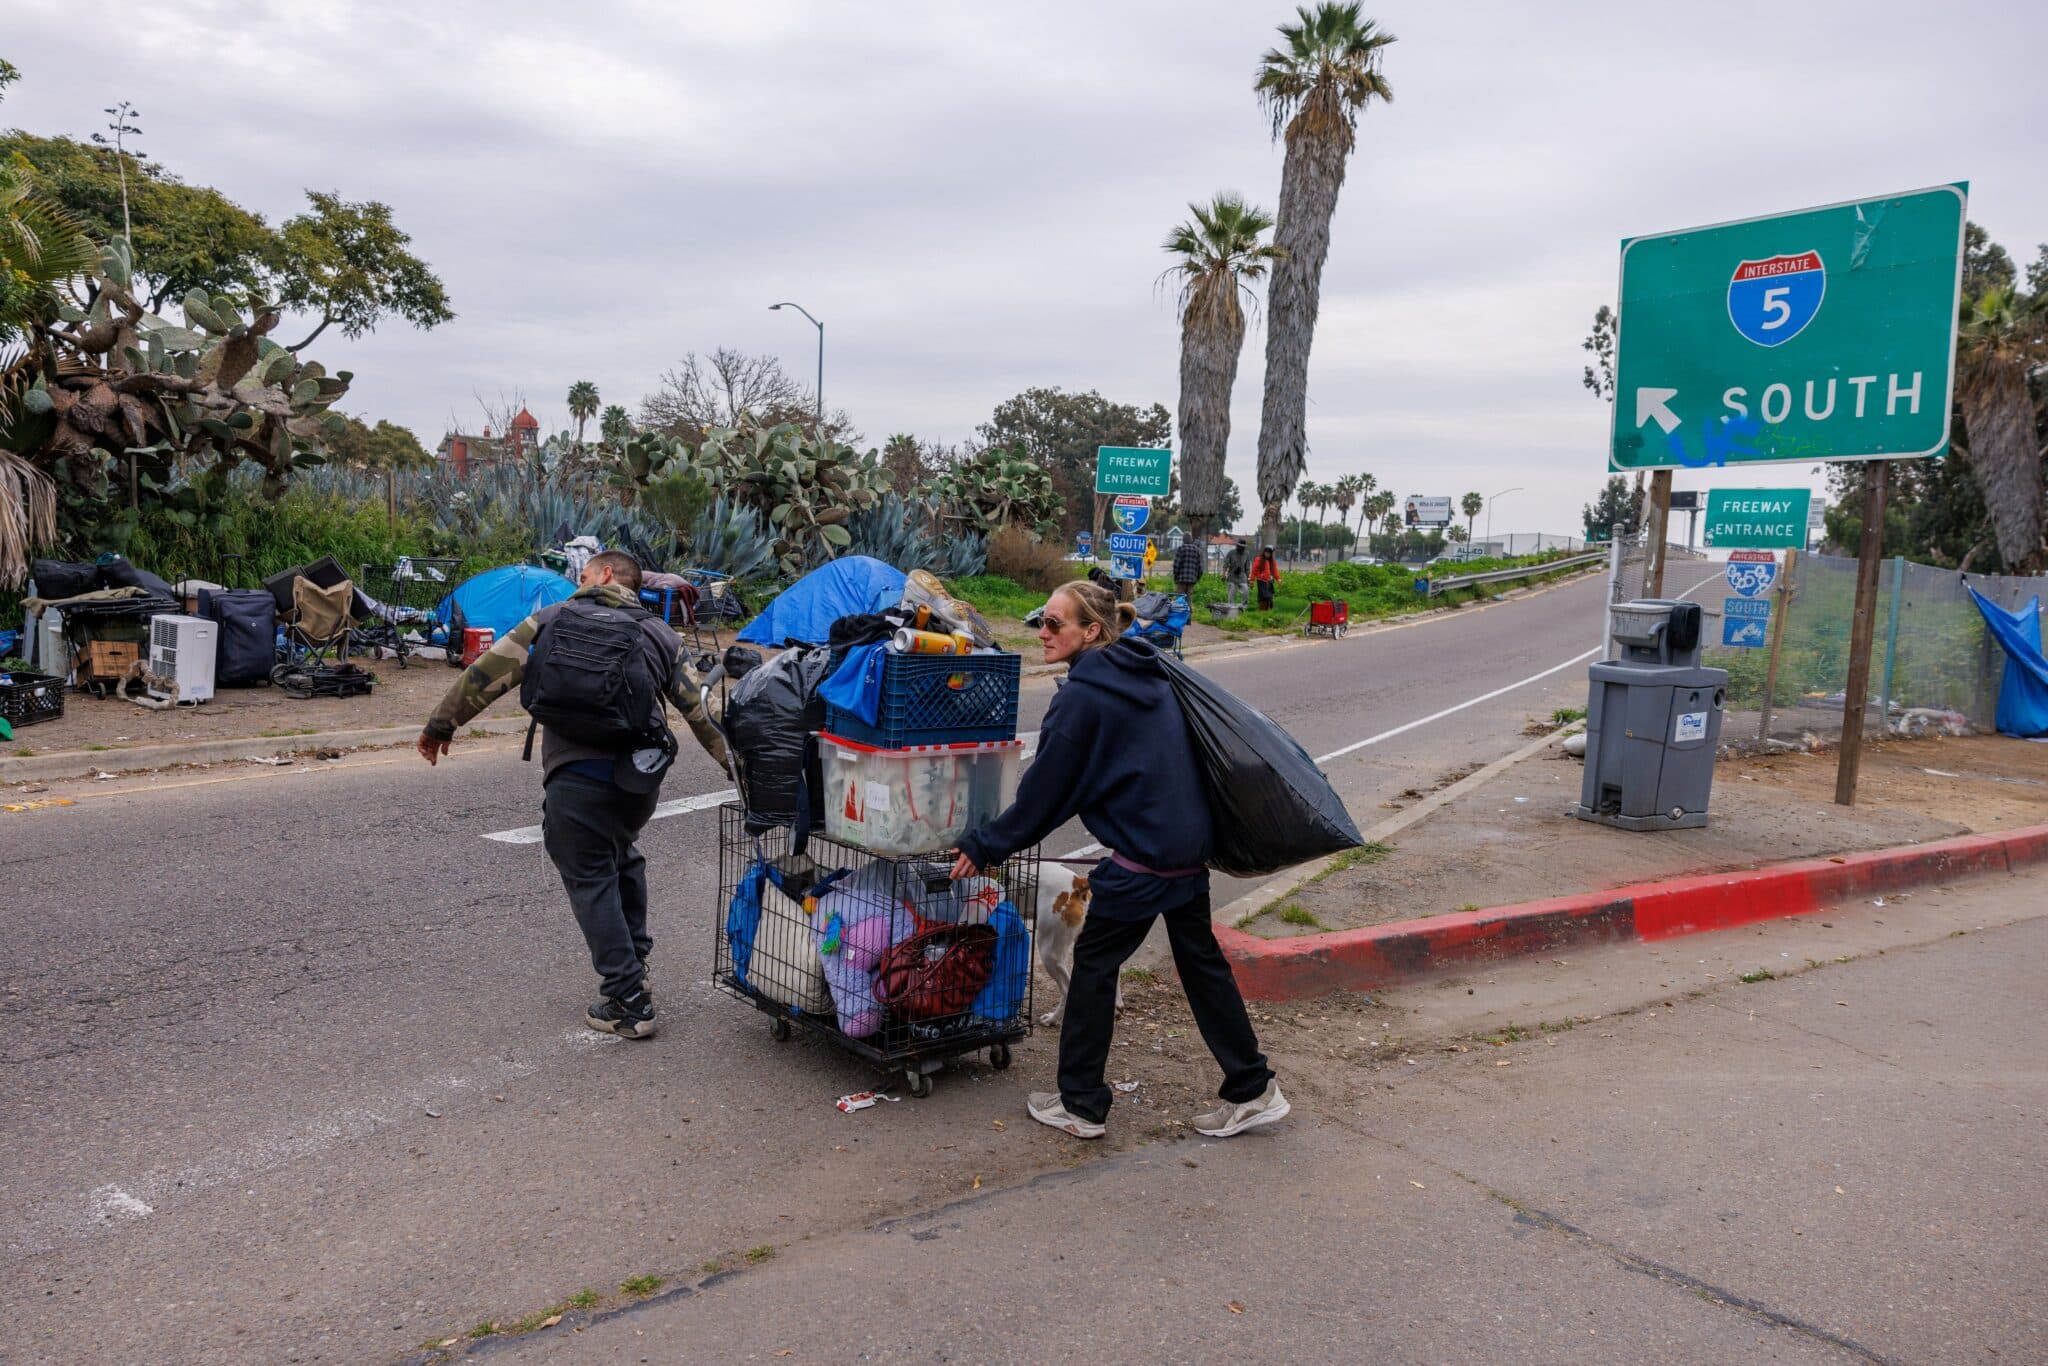 A homeless couple moves their belongings to the side of a freeway on land under state jurisdiction, after being evicted from a downtown location on the side of a city street, in San Diego, Feb. 26, 2024. (OSV News photo/Mike Blake, Reuters)